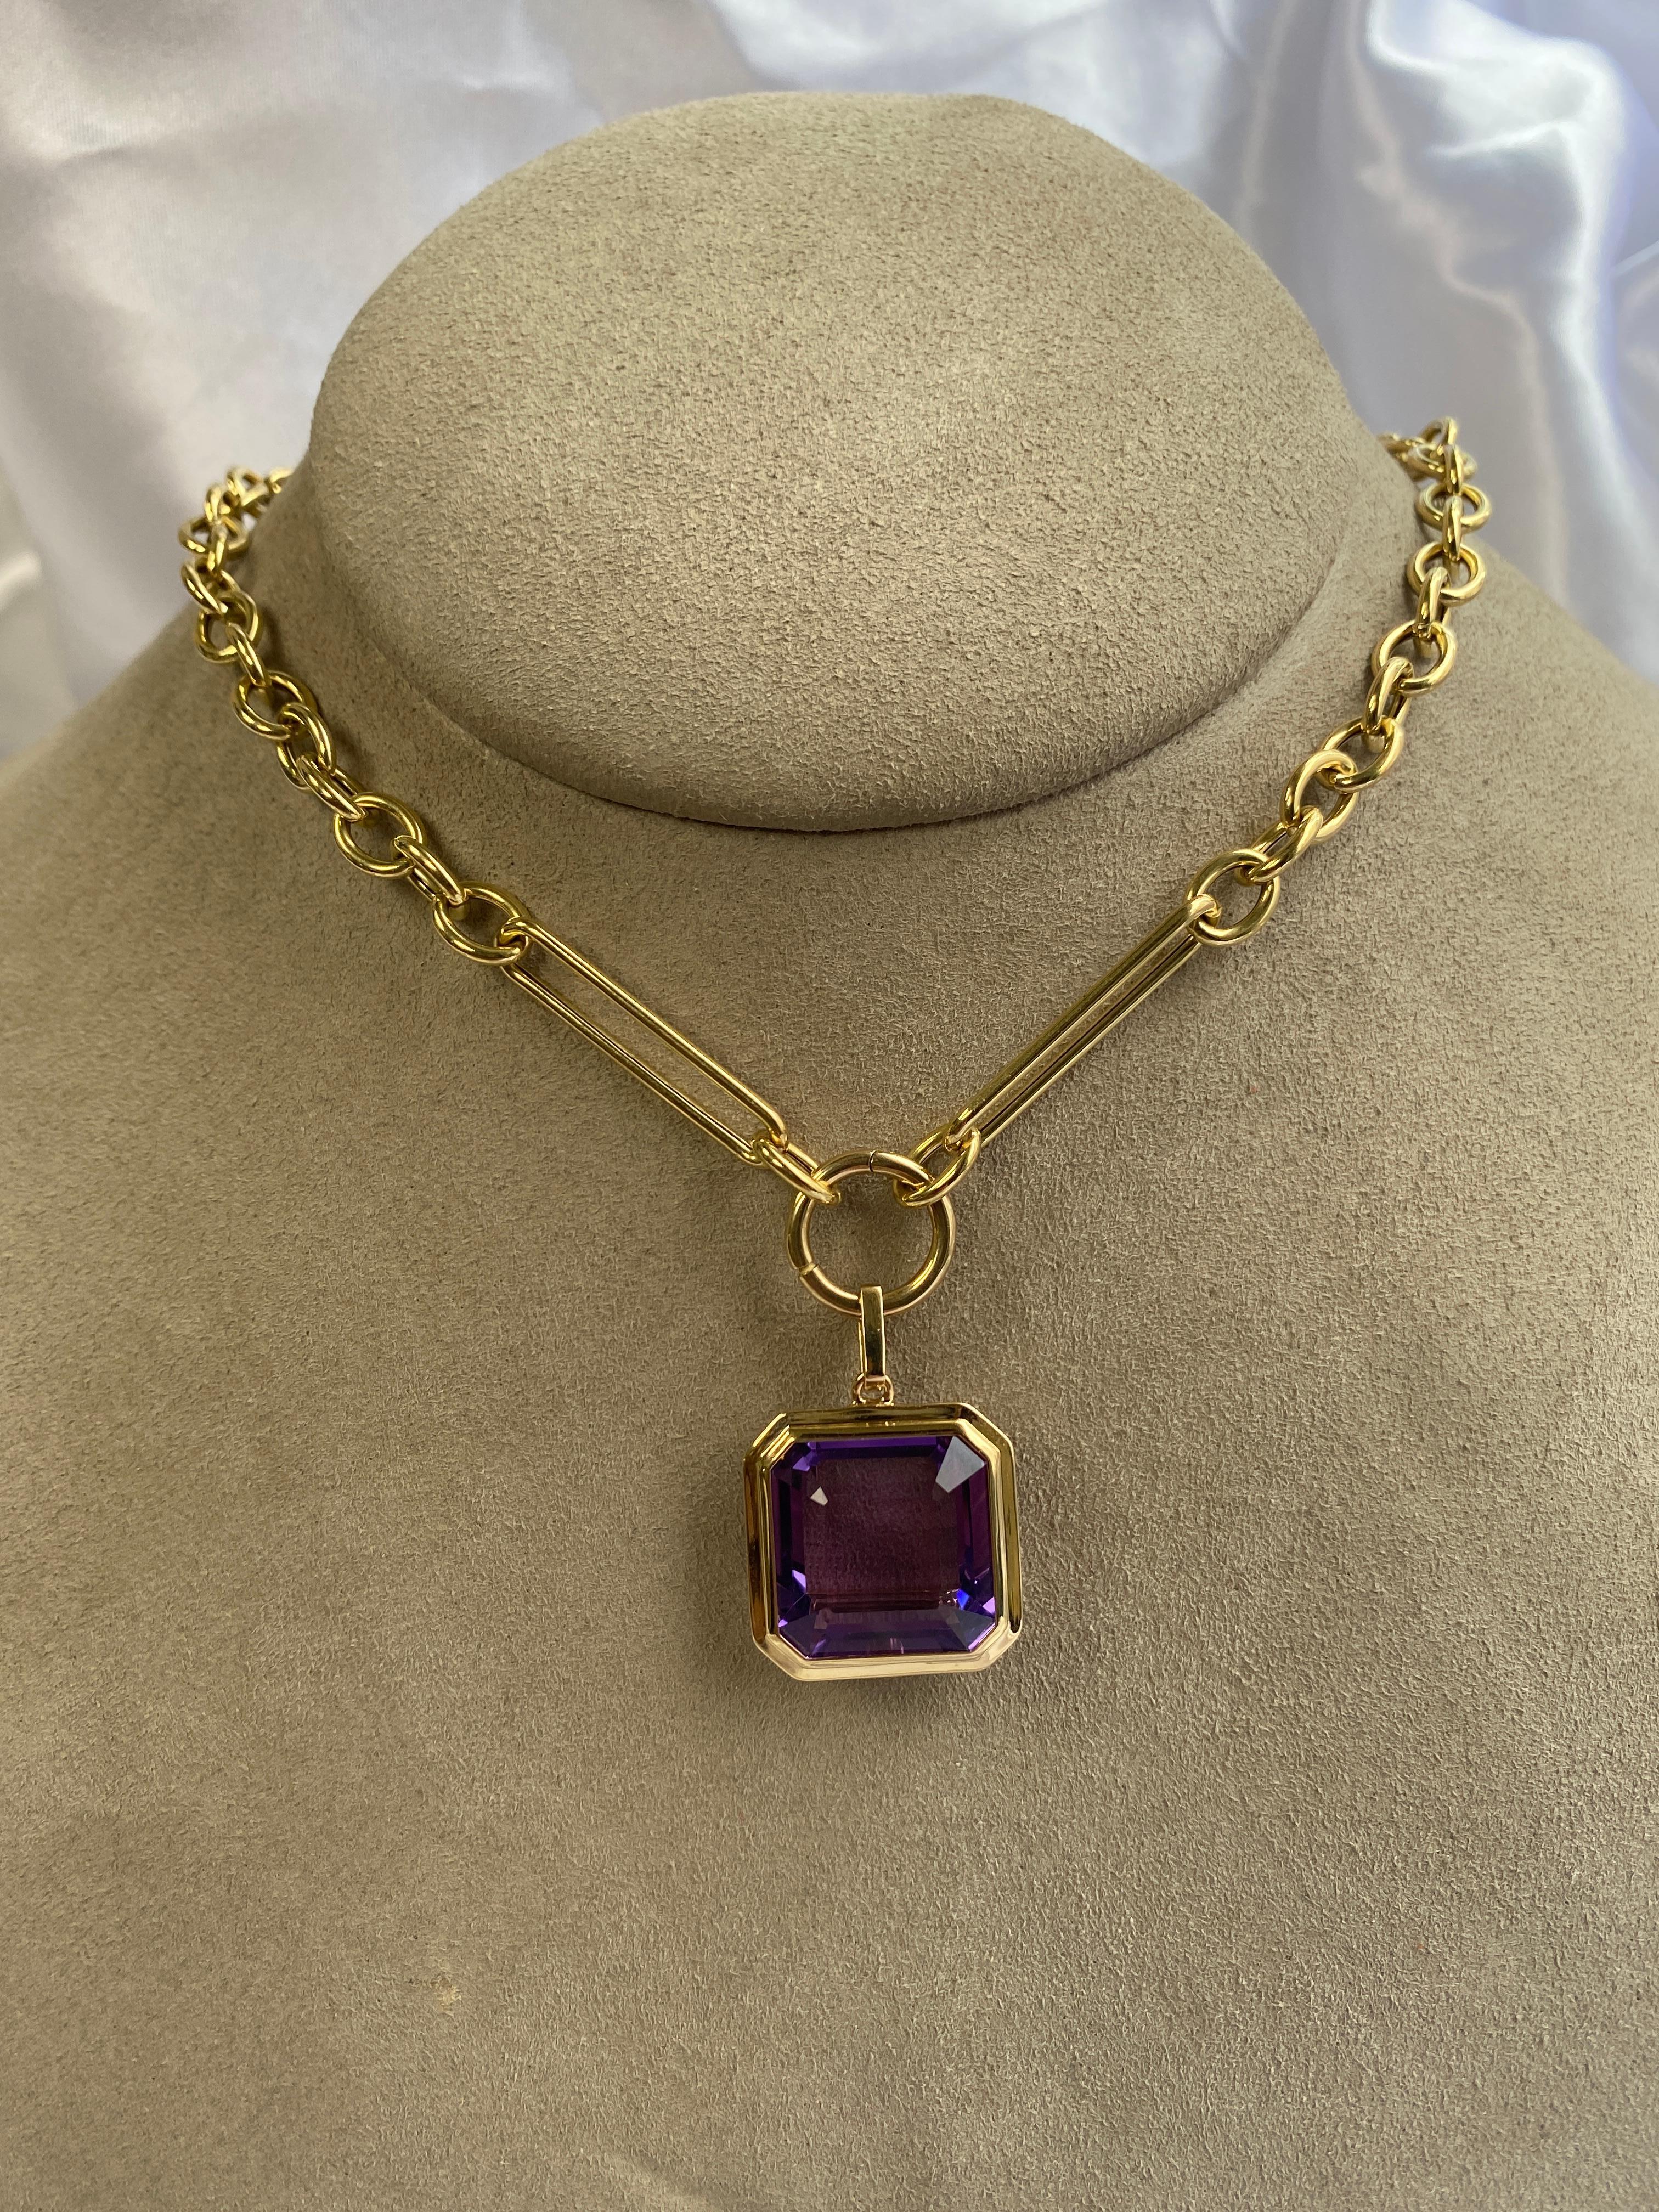 Goshwara Emerald Cut Amethyst Pendant In New Condition For Sale In New York, NY